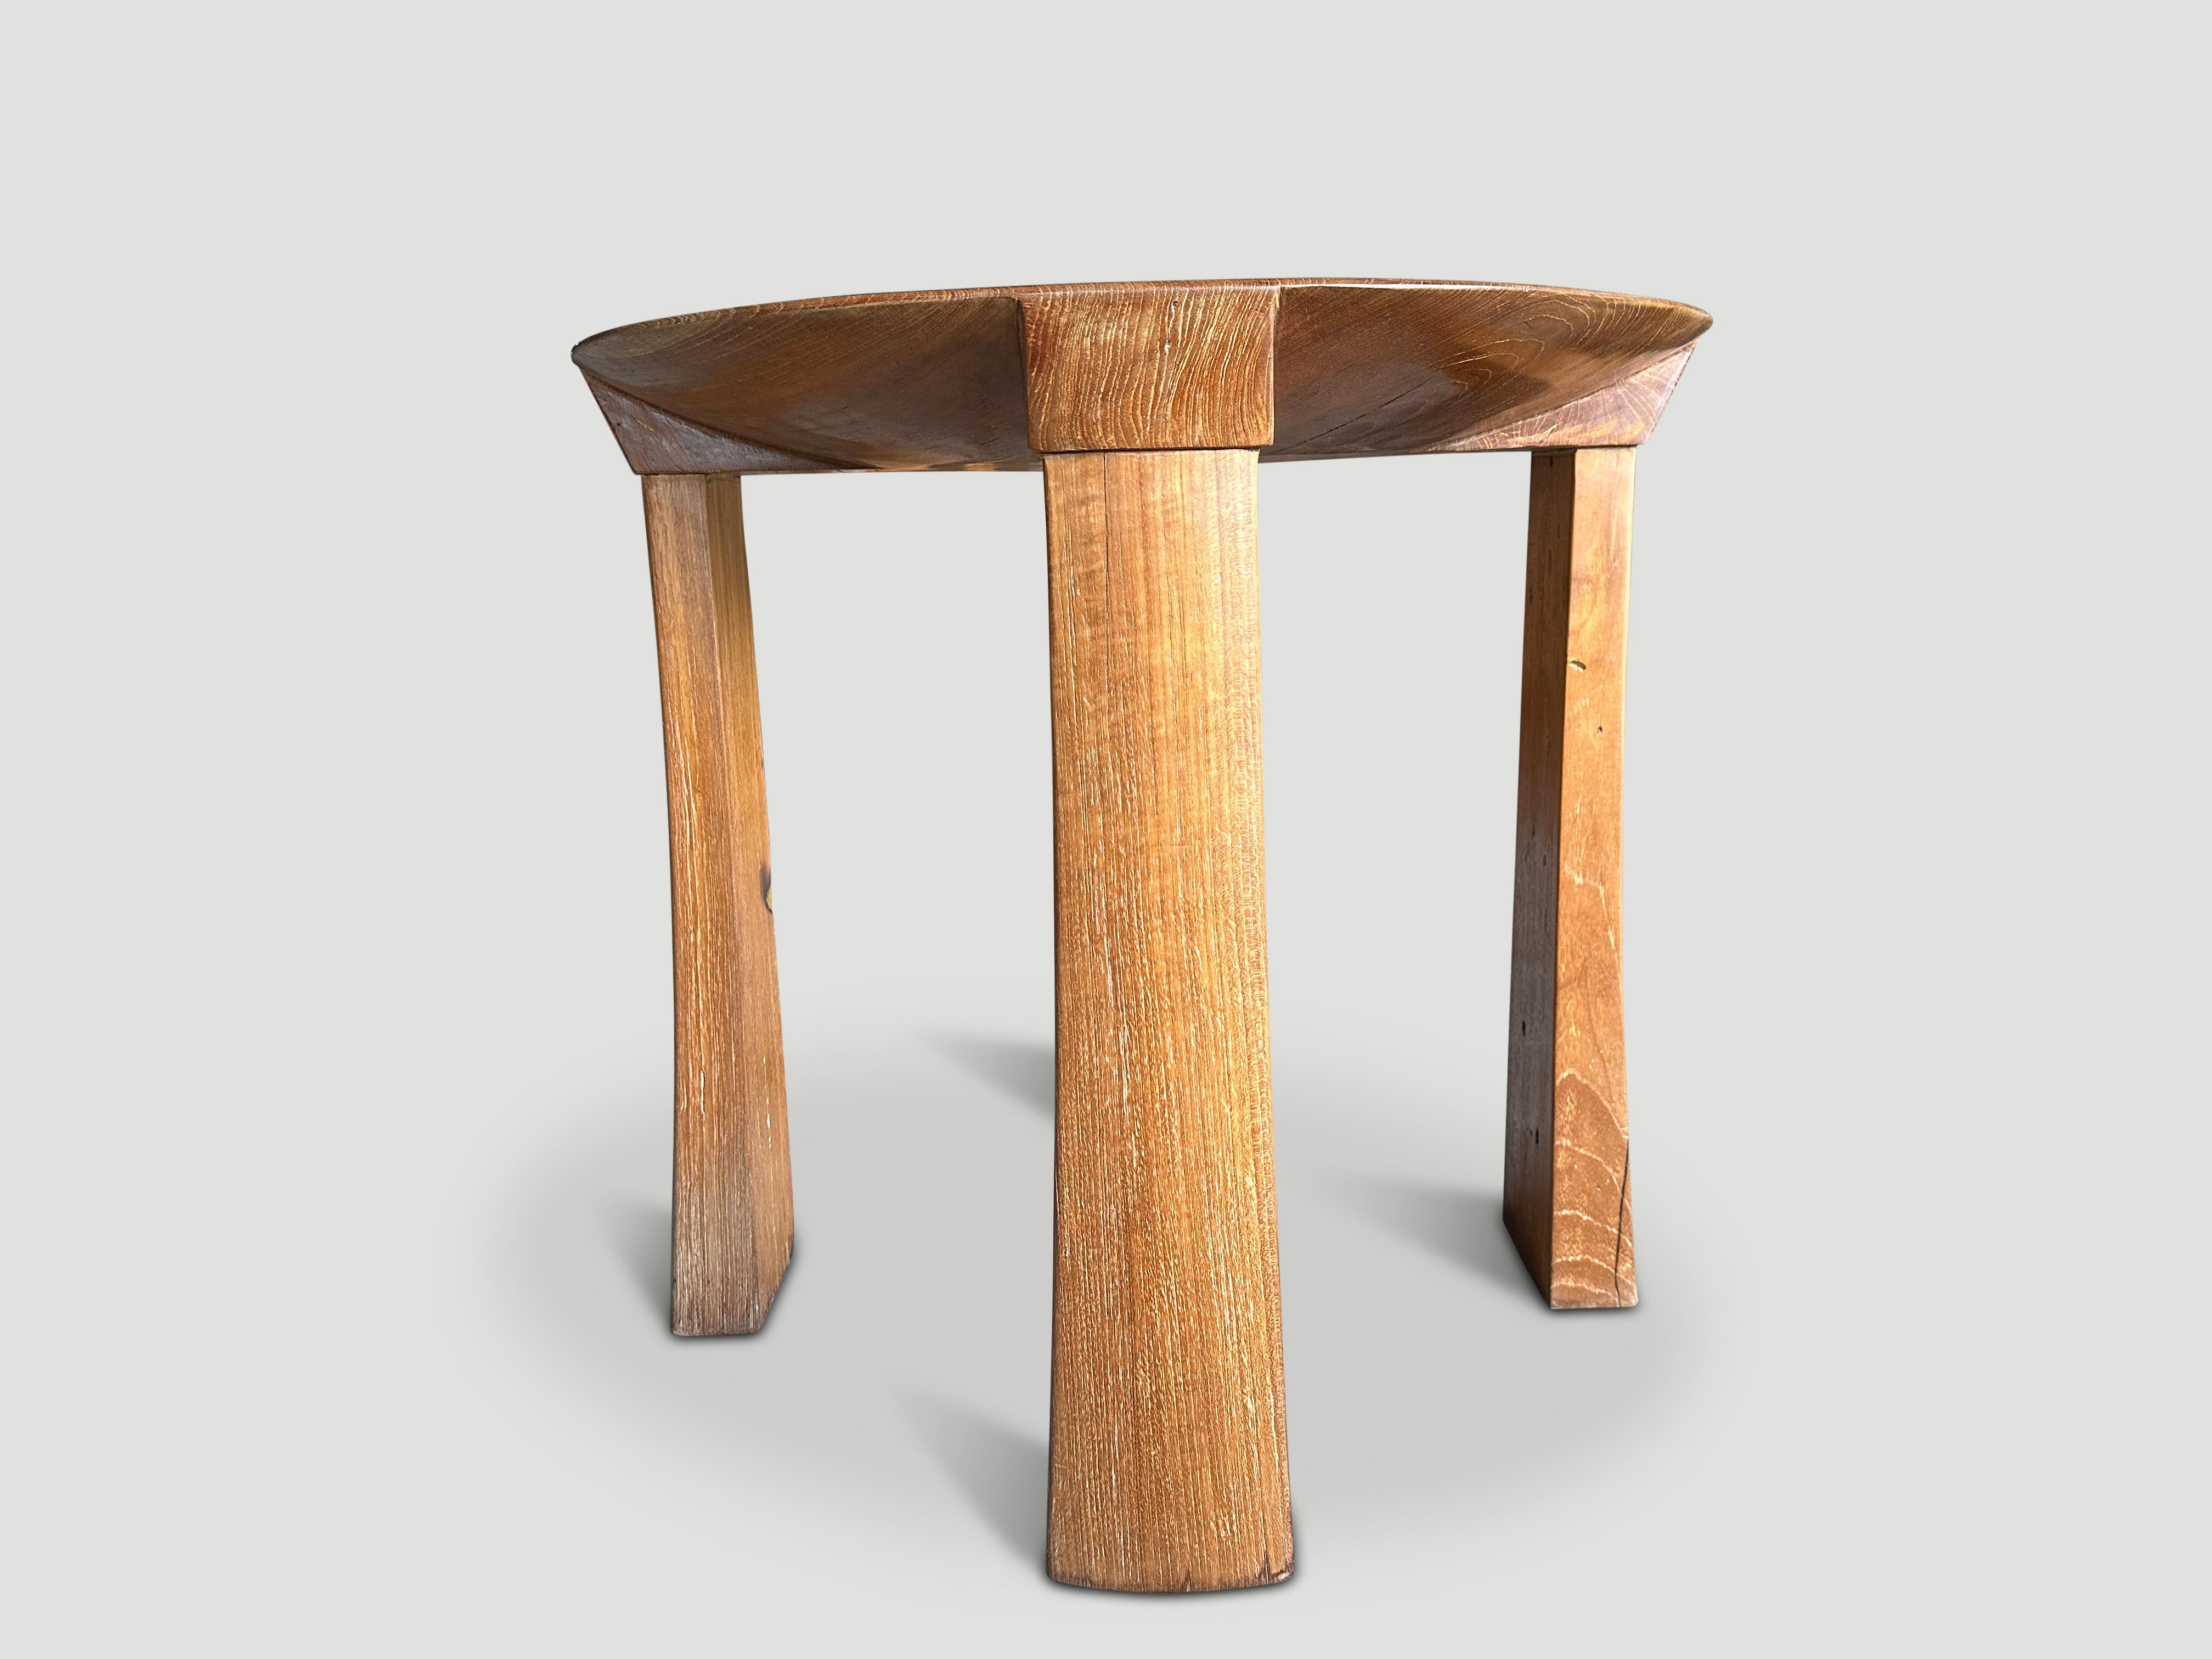 Magnificent 100 year old wood taken from my finest collection to produce this one of a kind large side table or entry table. The top has an impressive four inch bevel. We added a butterfly inlaid into the wood and finished with a natural oil